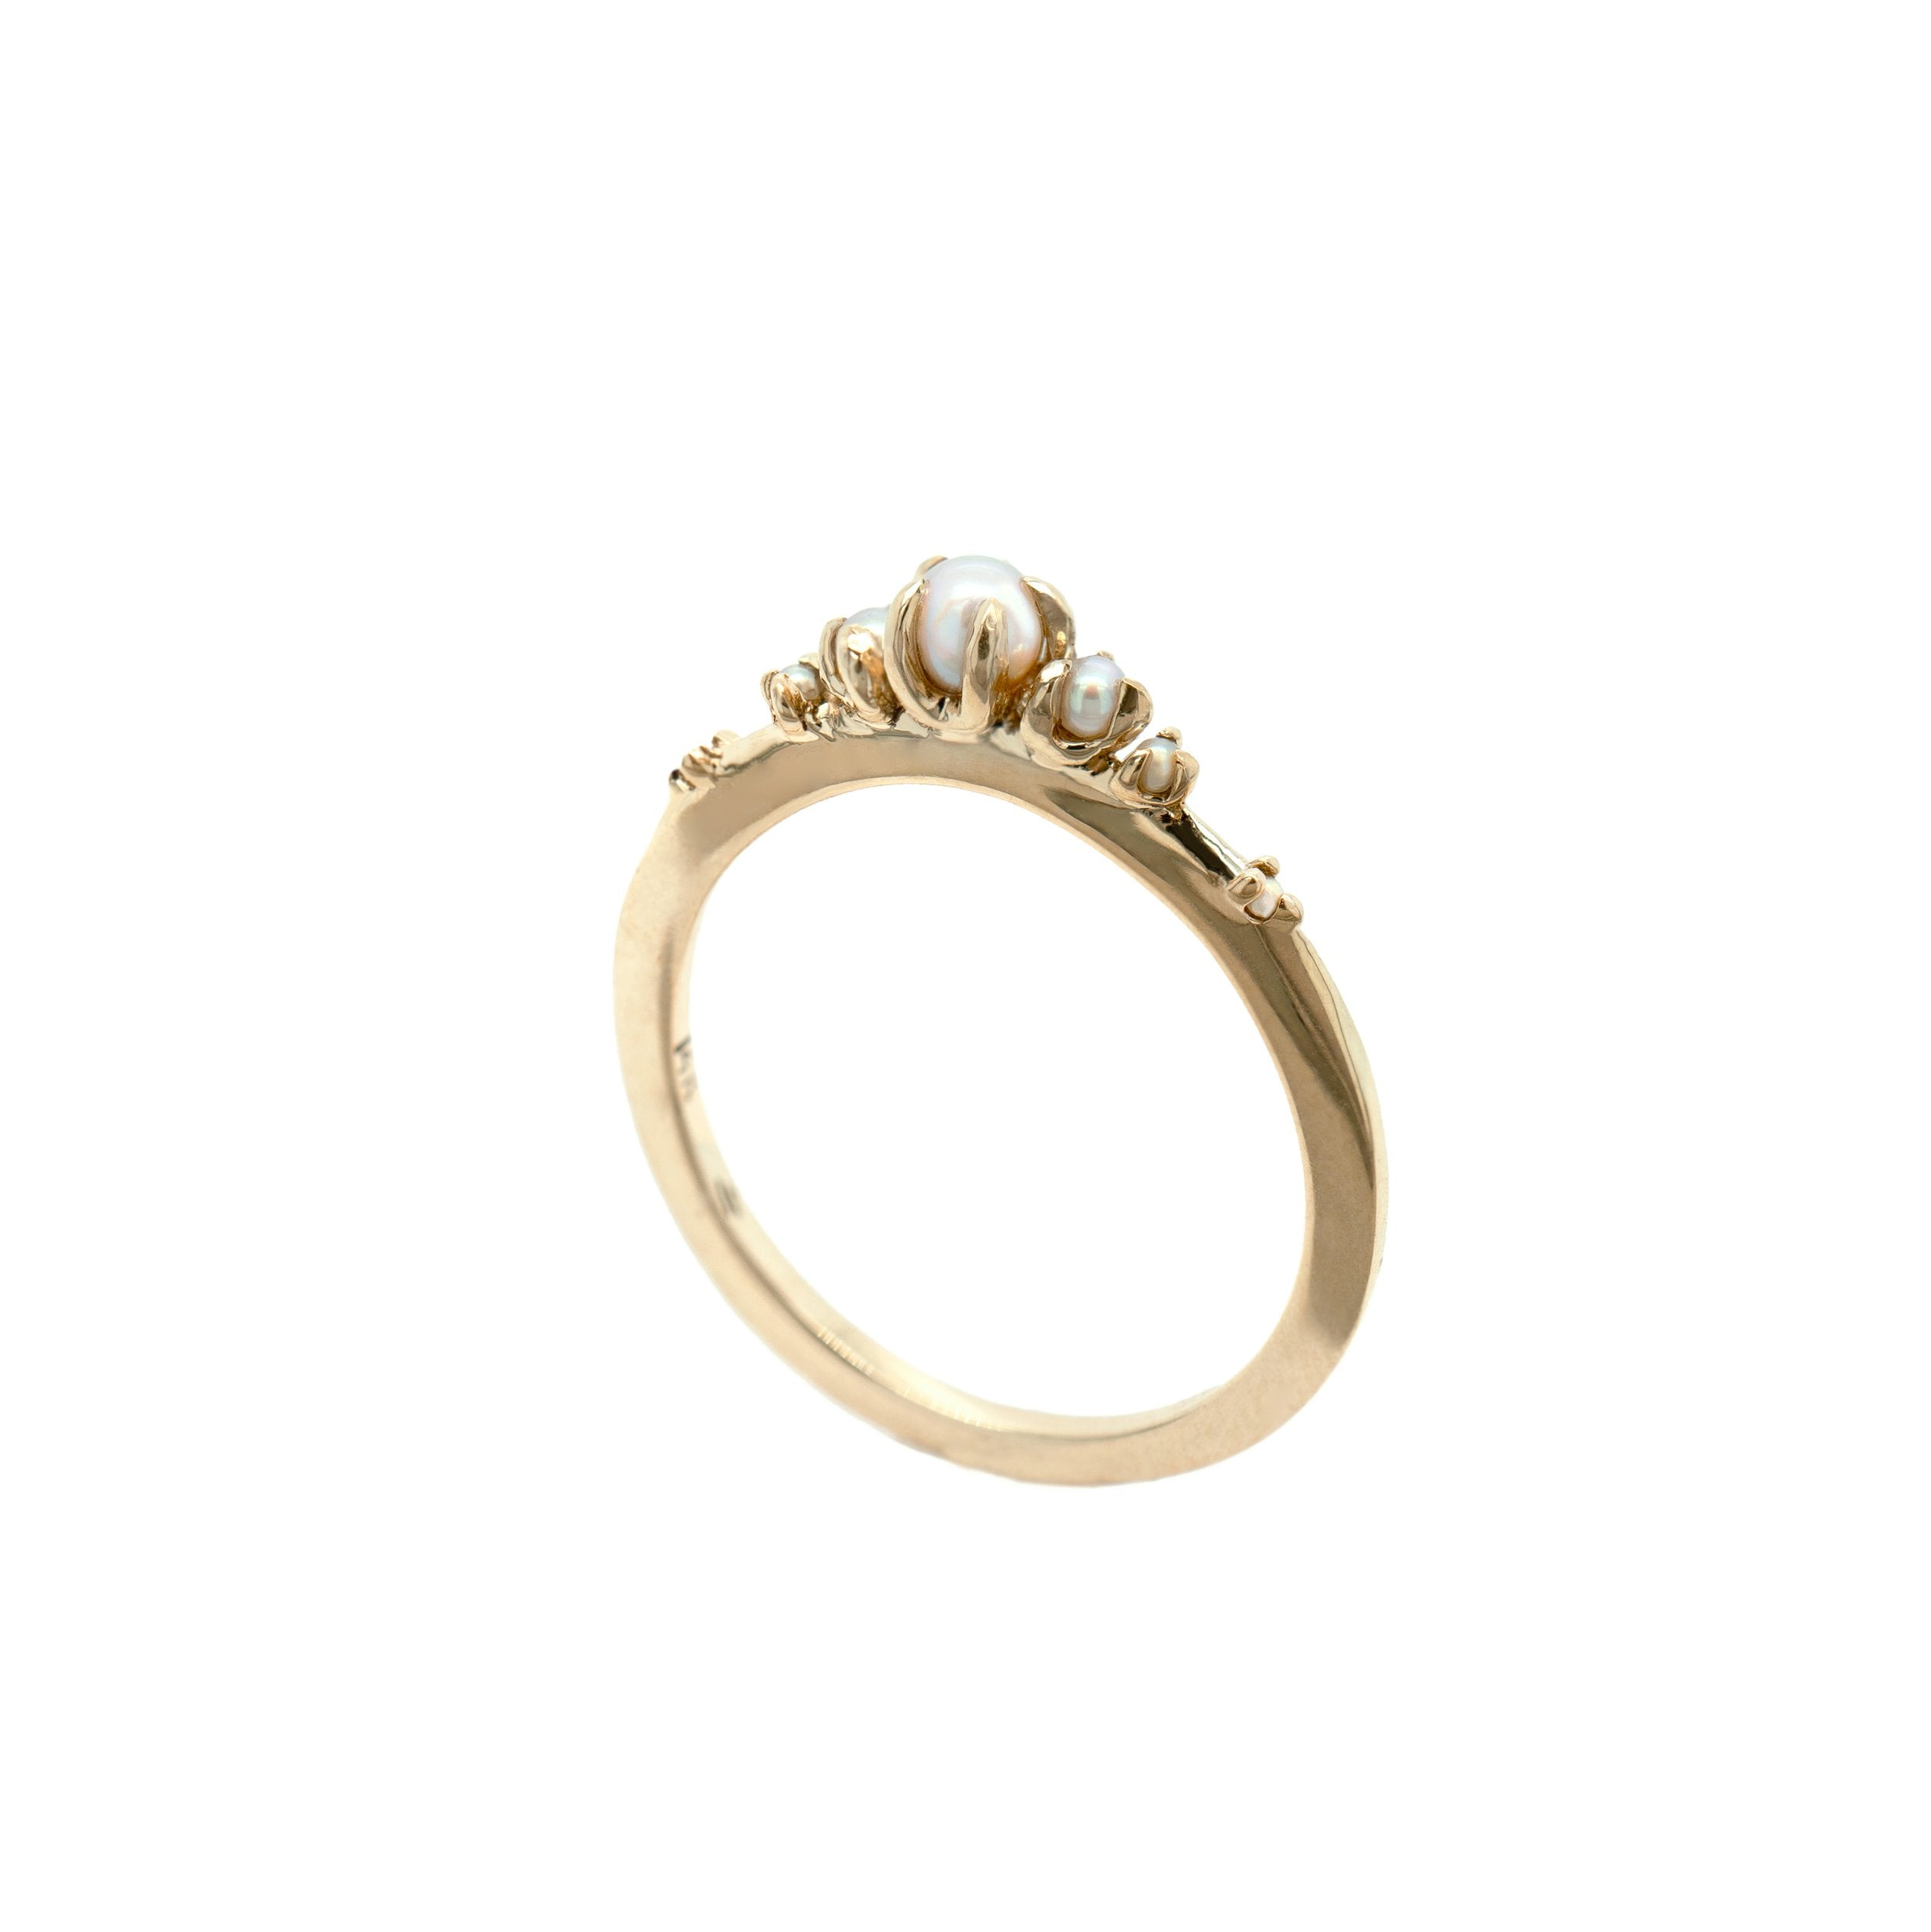 A product photo of Laurie Fleming Jewellery's "Pearl Water Lily Ring," a delicate solid gold stacking ring with freshwater seed pearls scattered along the band. The ring is on a white background.